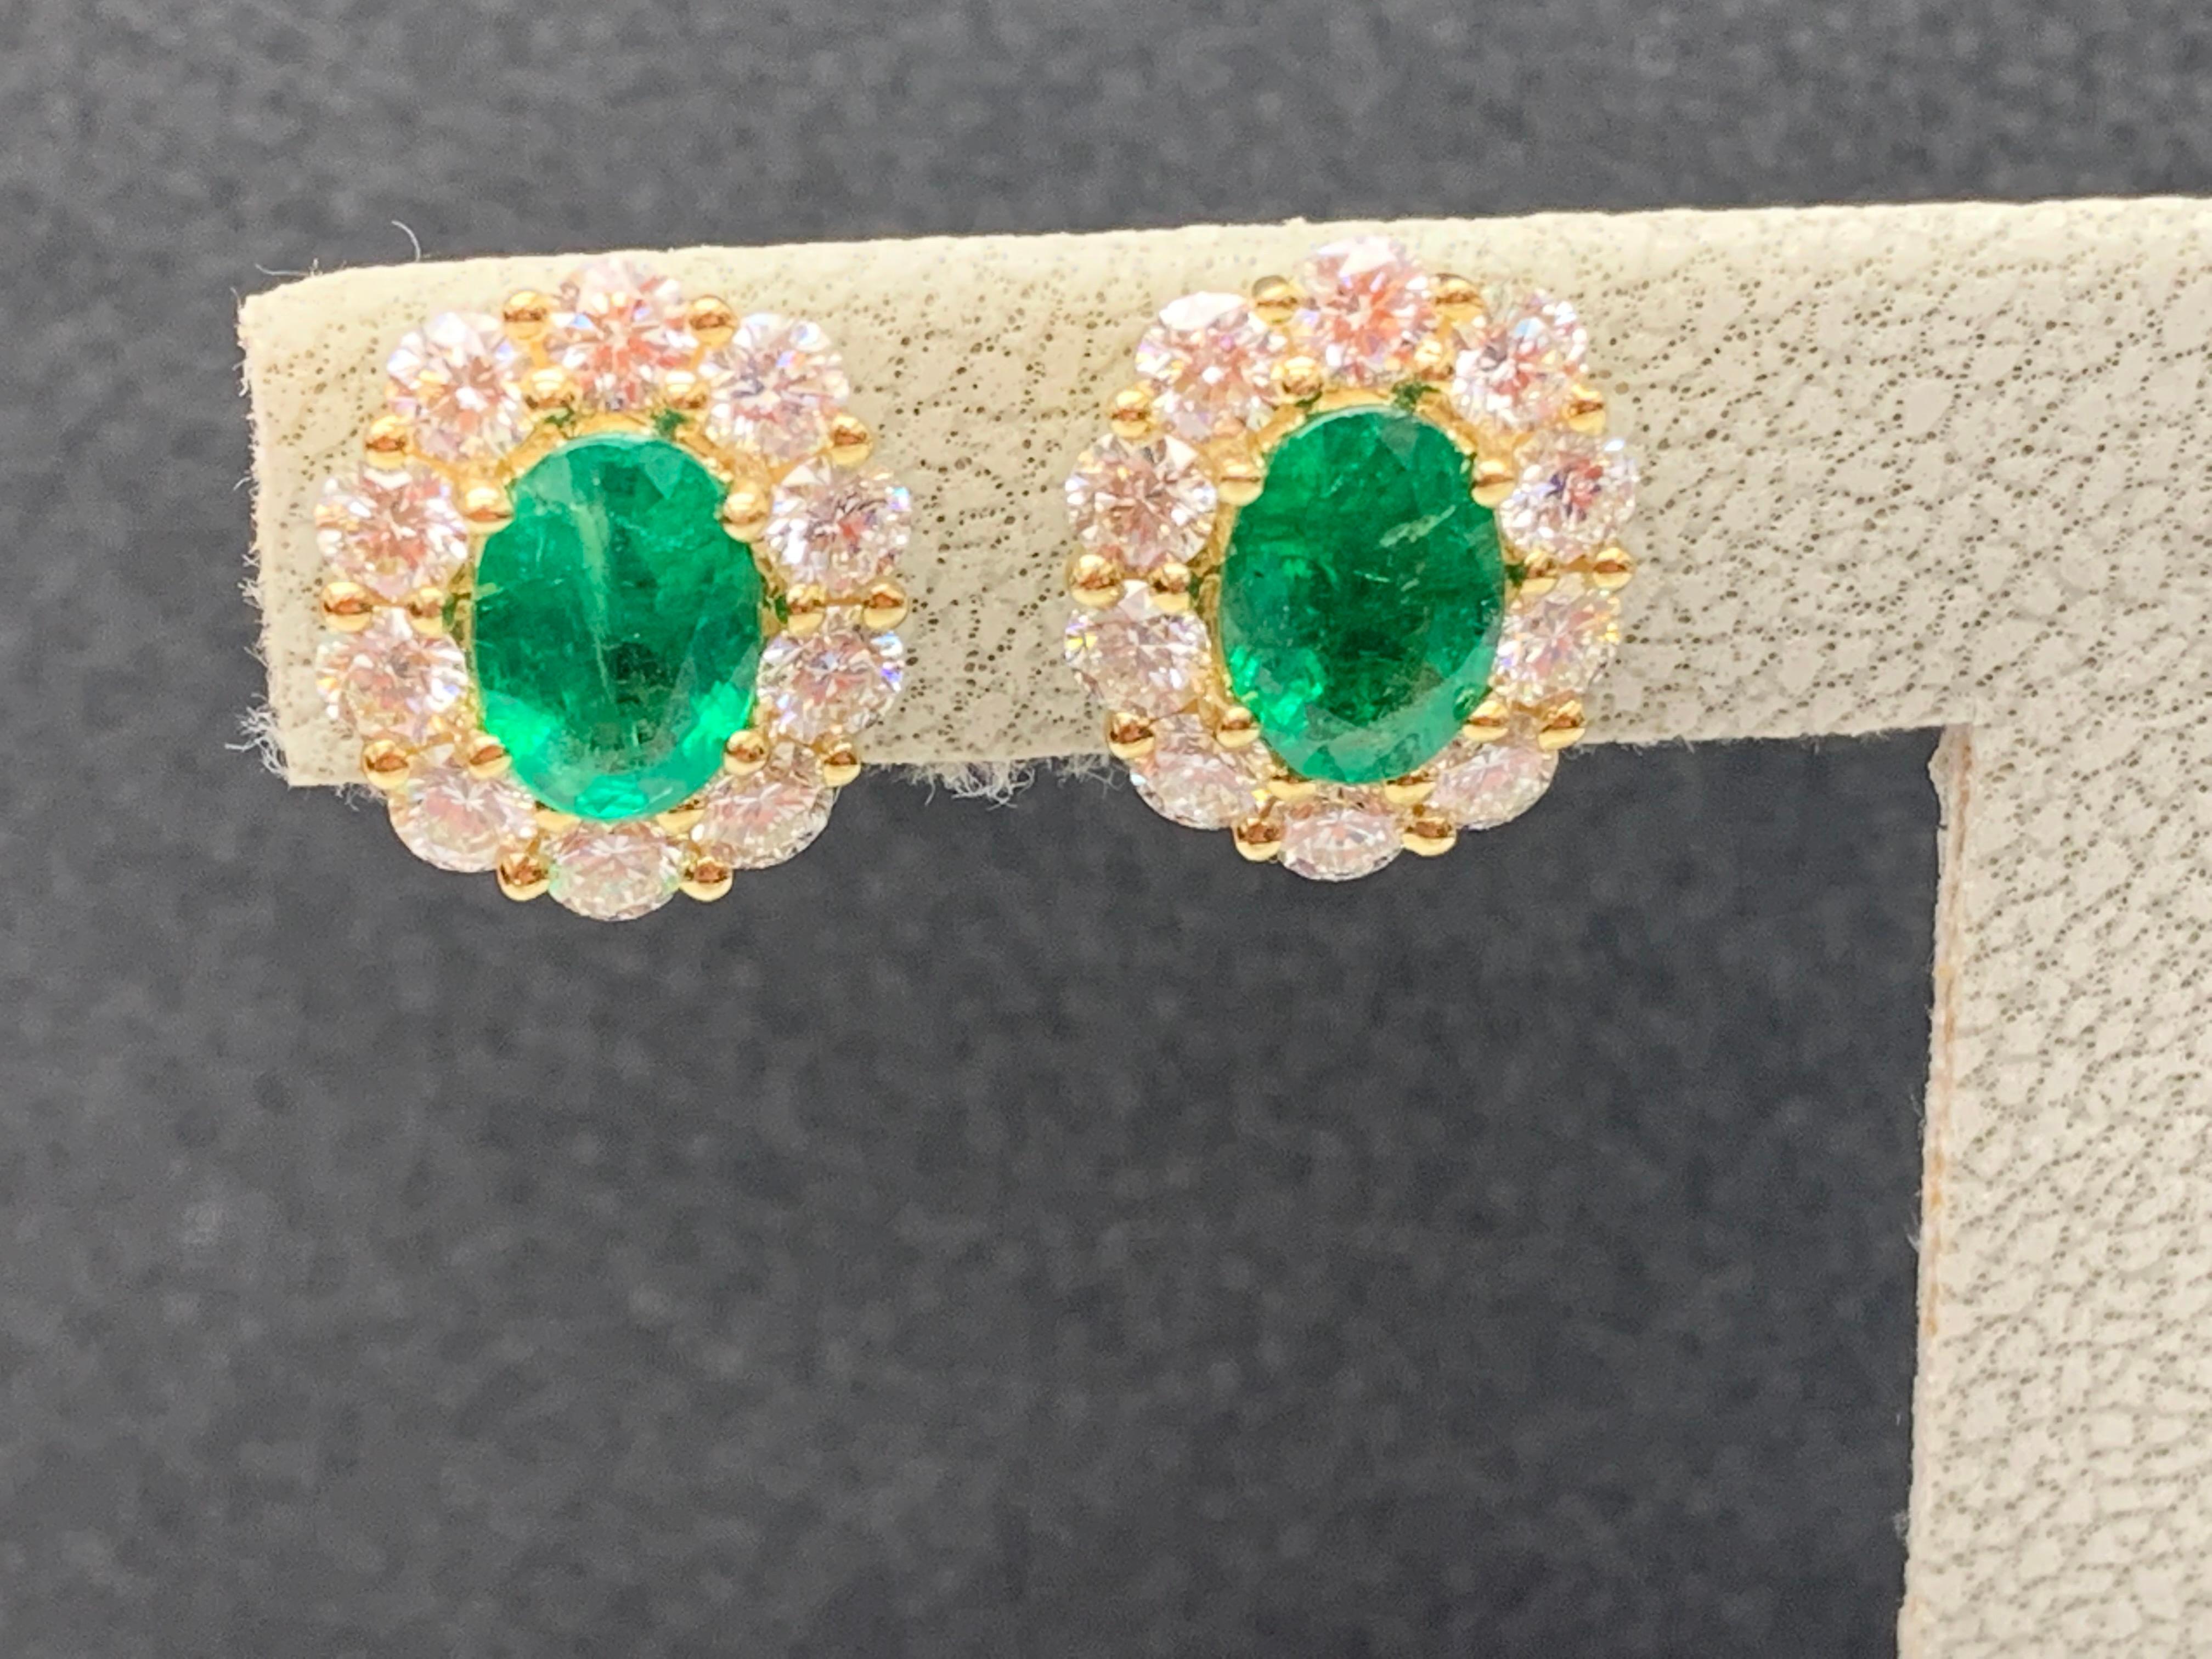 A simple pair of stud earrings showcasing 1.28 carats of 2 oval cut lush green emeralds, surrounded by a single row of 20 round brilliant diamonds weighing 1.35 carats. Made in 18-karat white gold.